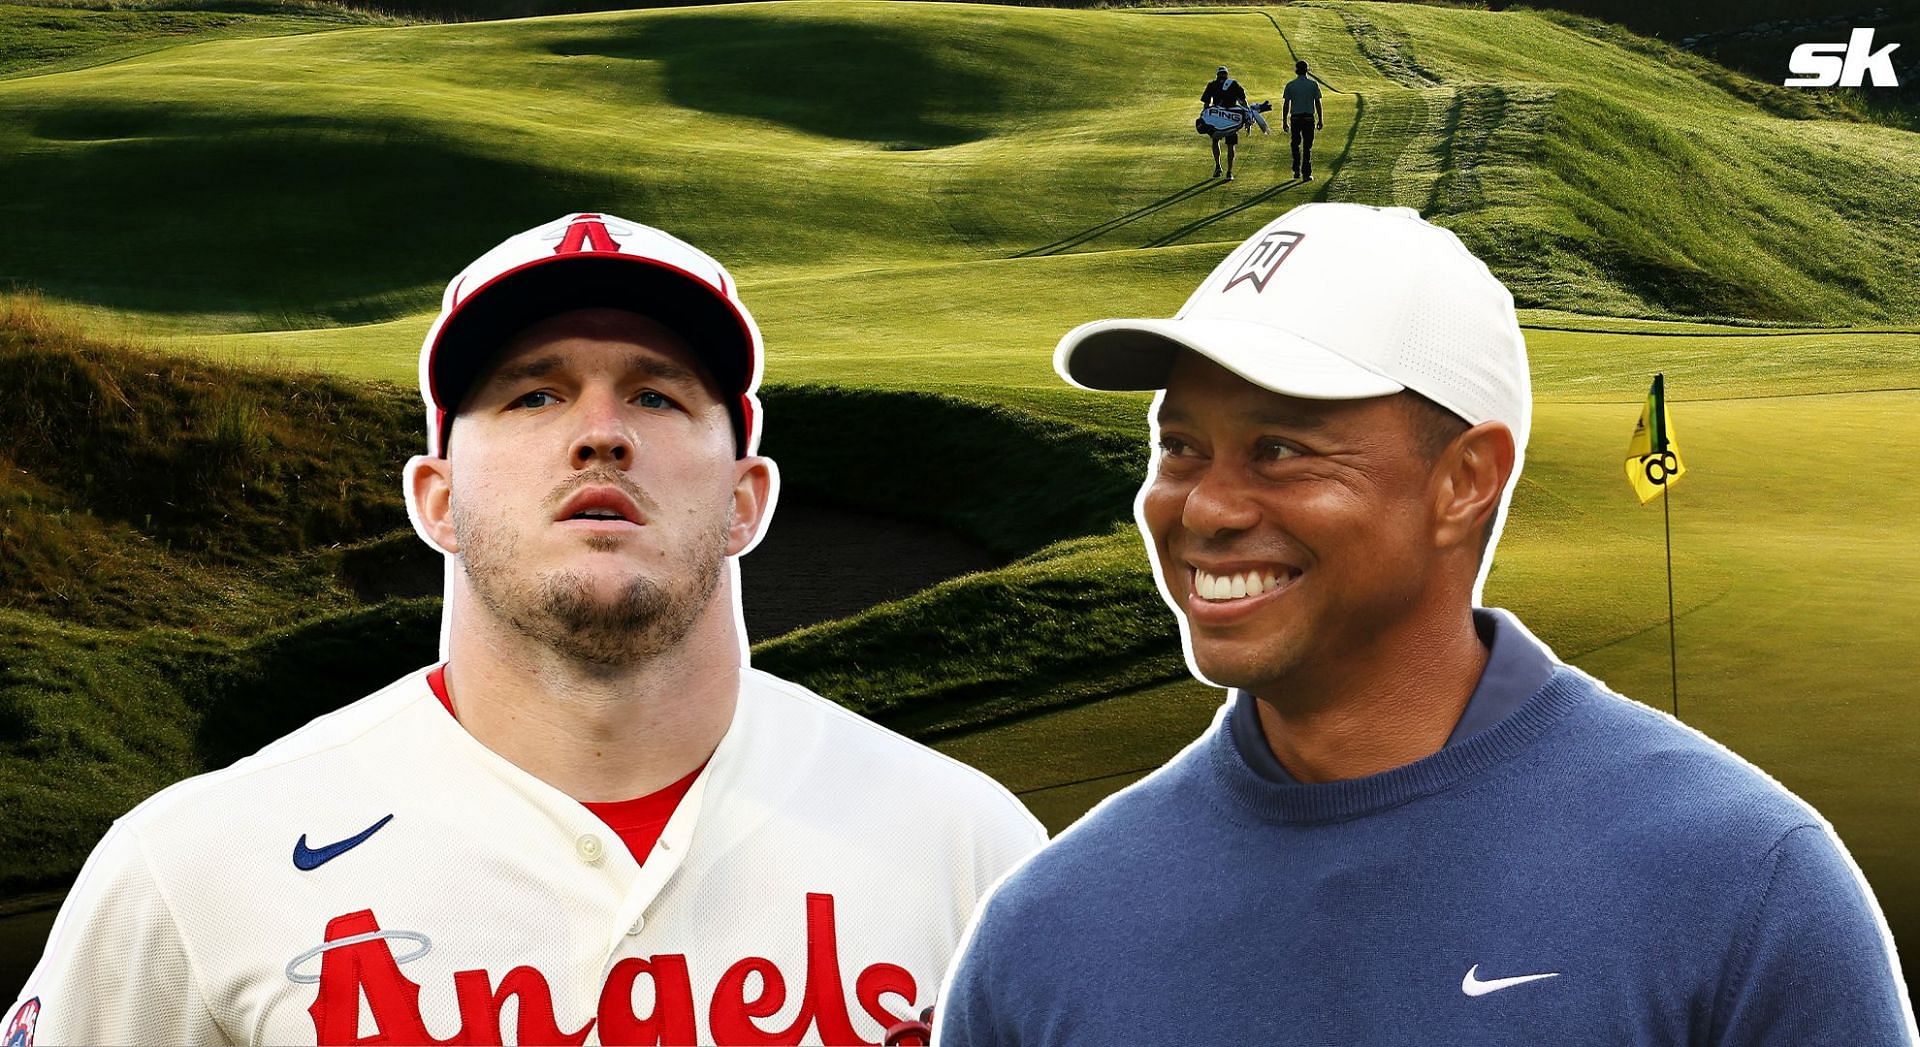 Mike Trout shared on social media that his club course designed by Tiger Woods is making progress